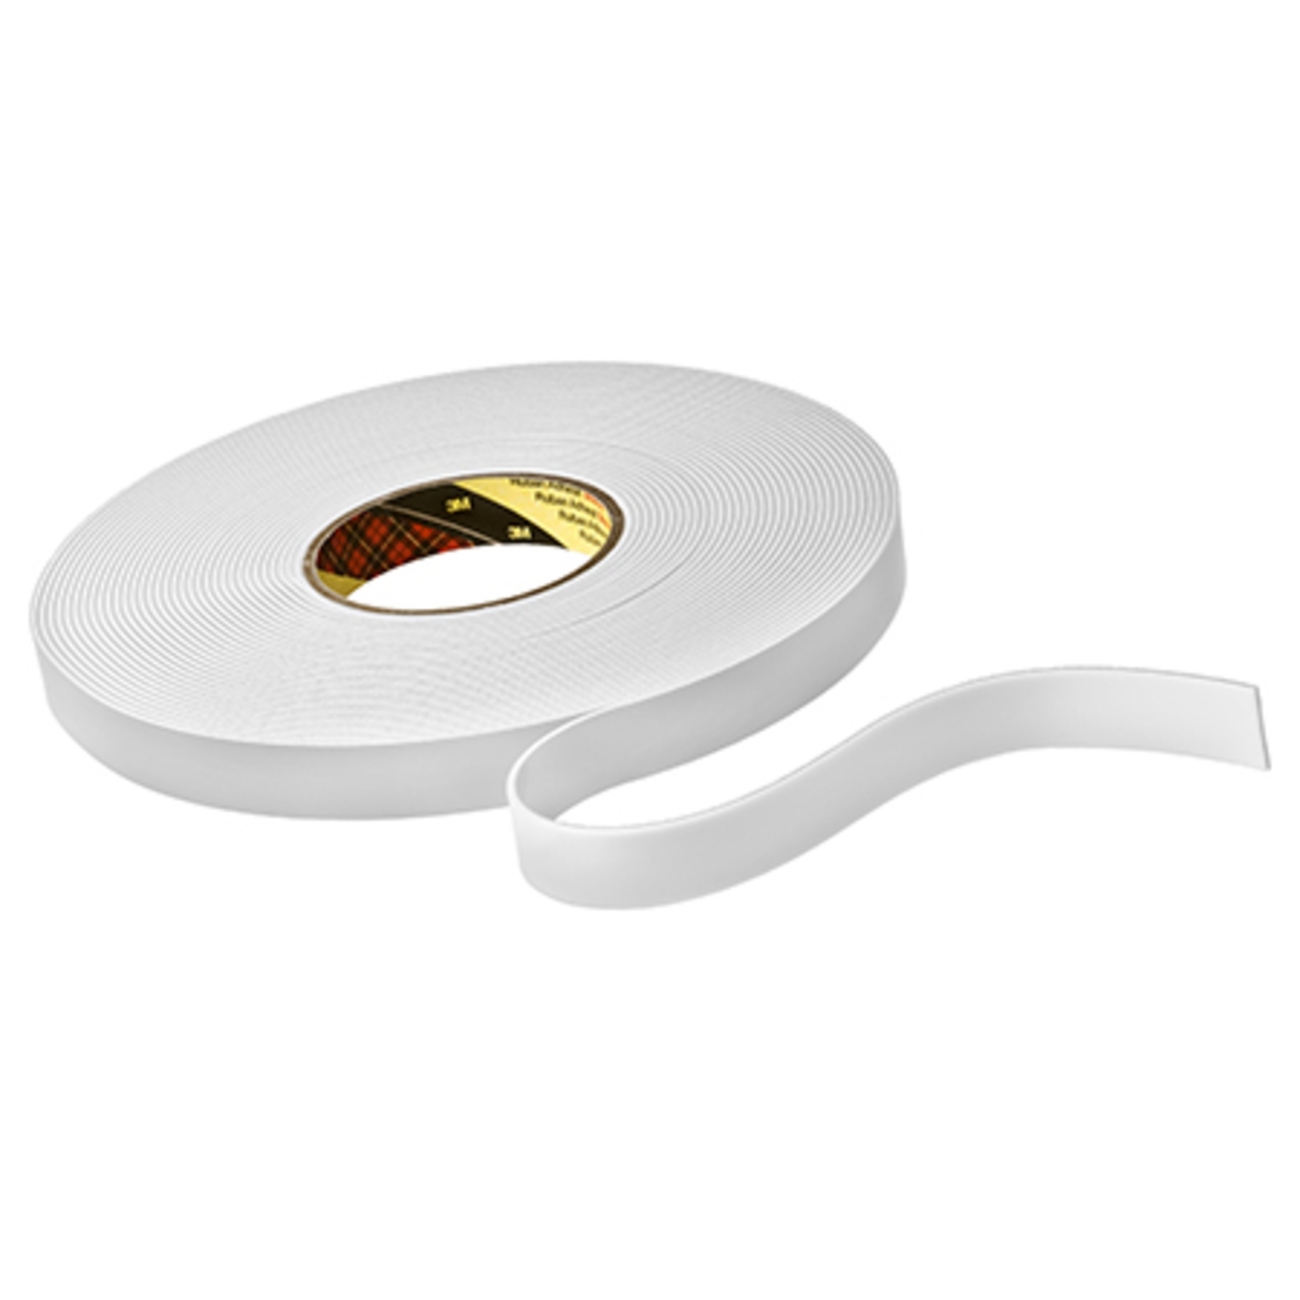 3M Double-sided PE foam tape with acrylic adhesive 9515W, white, 1500 mm x 33 m, 1.5 mm